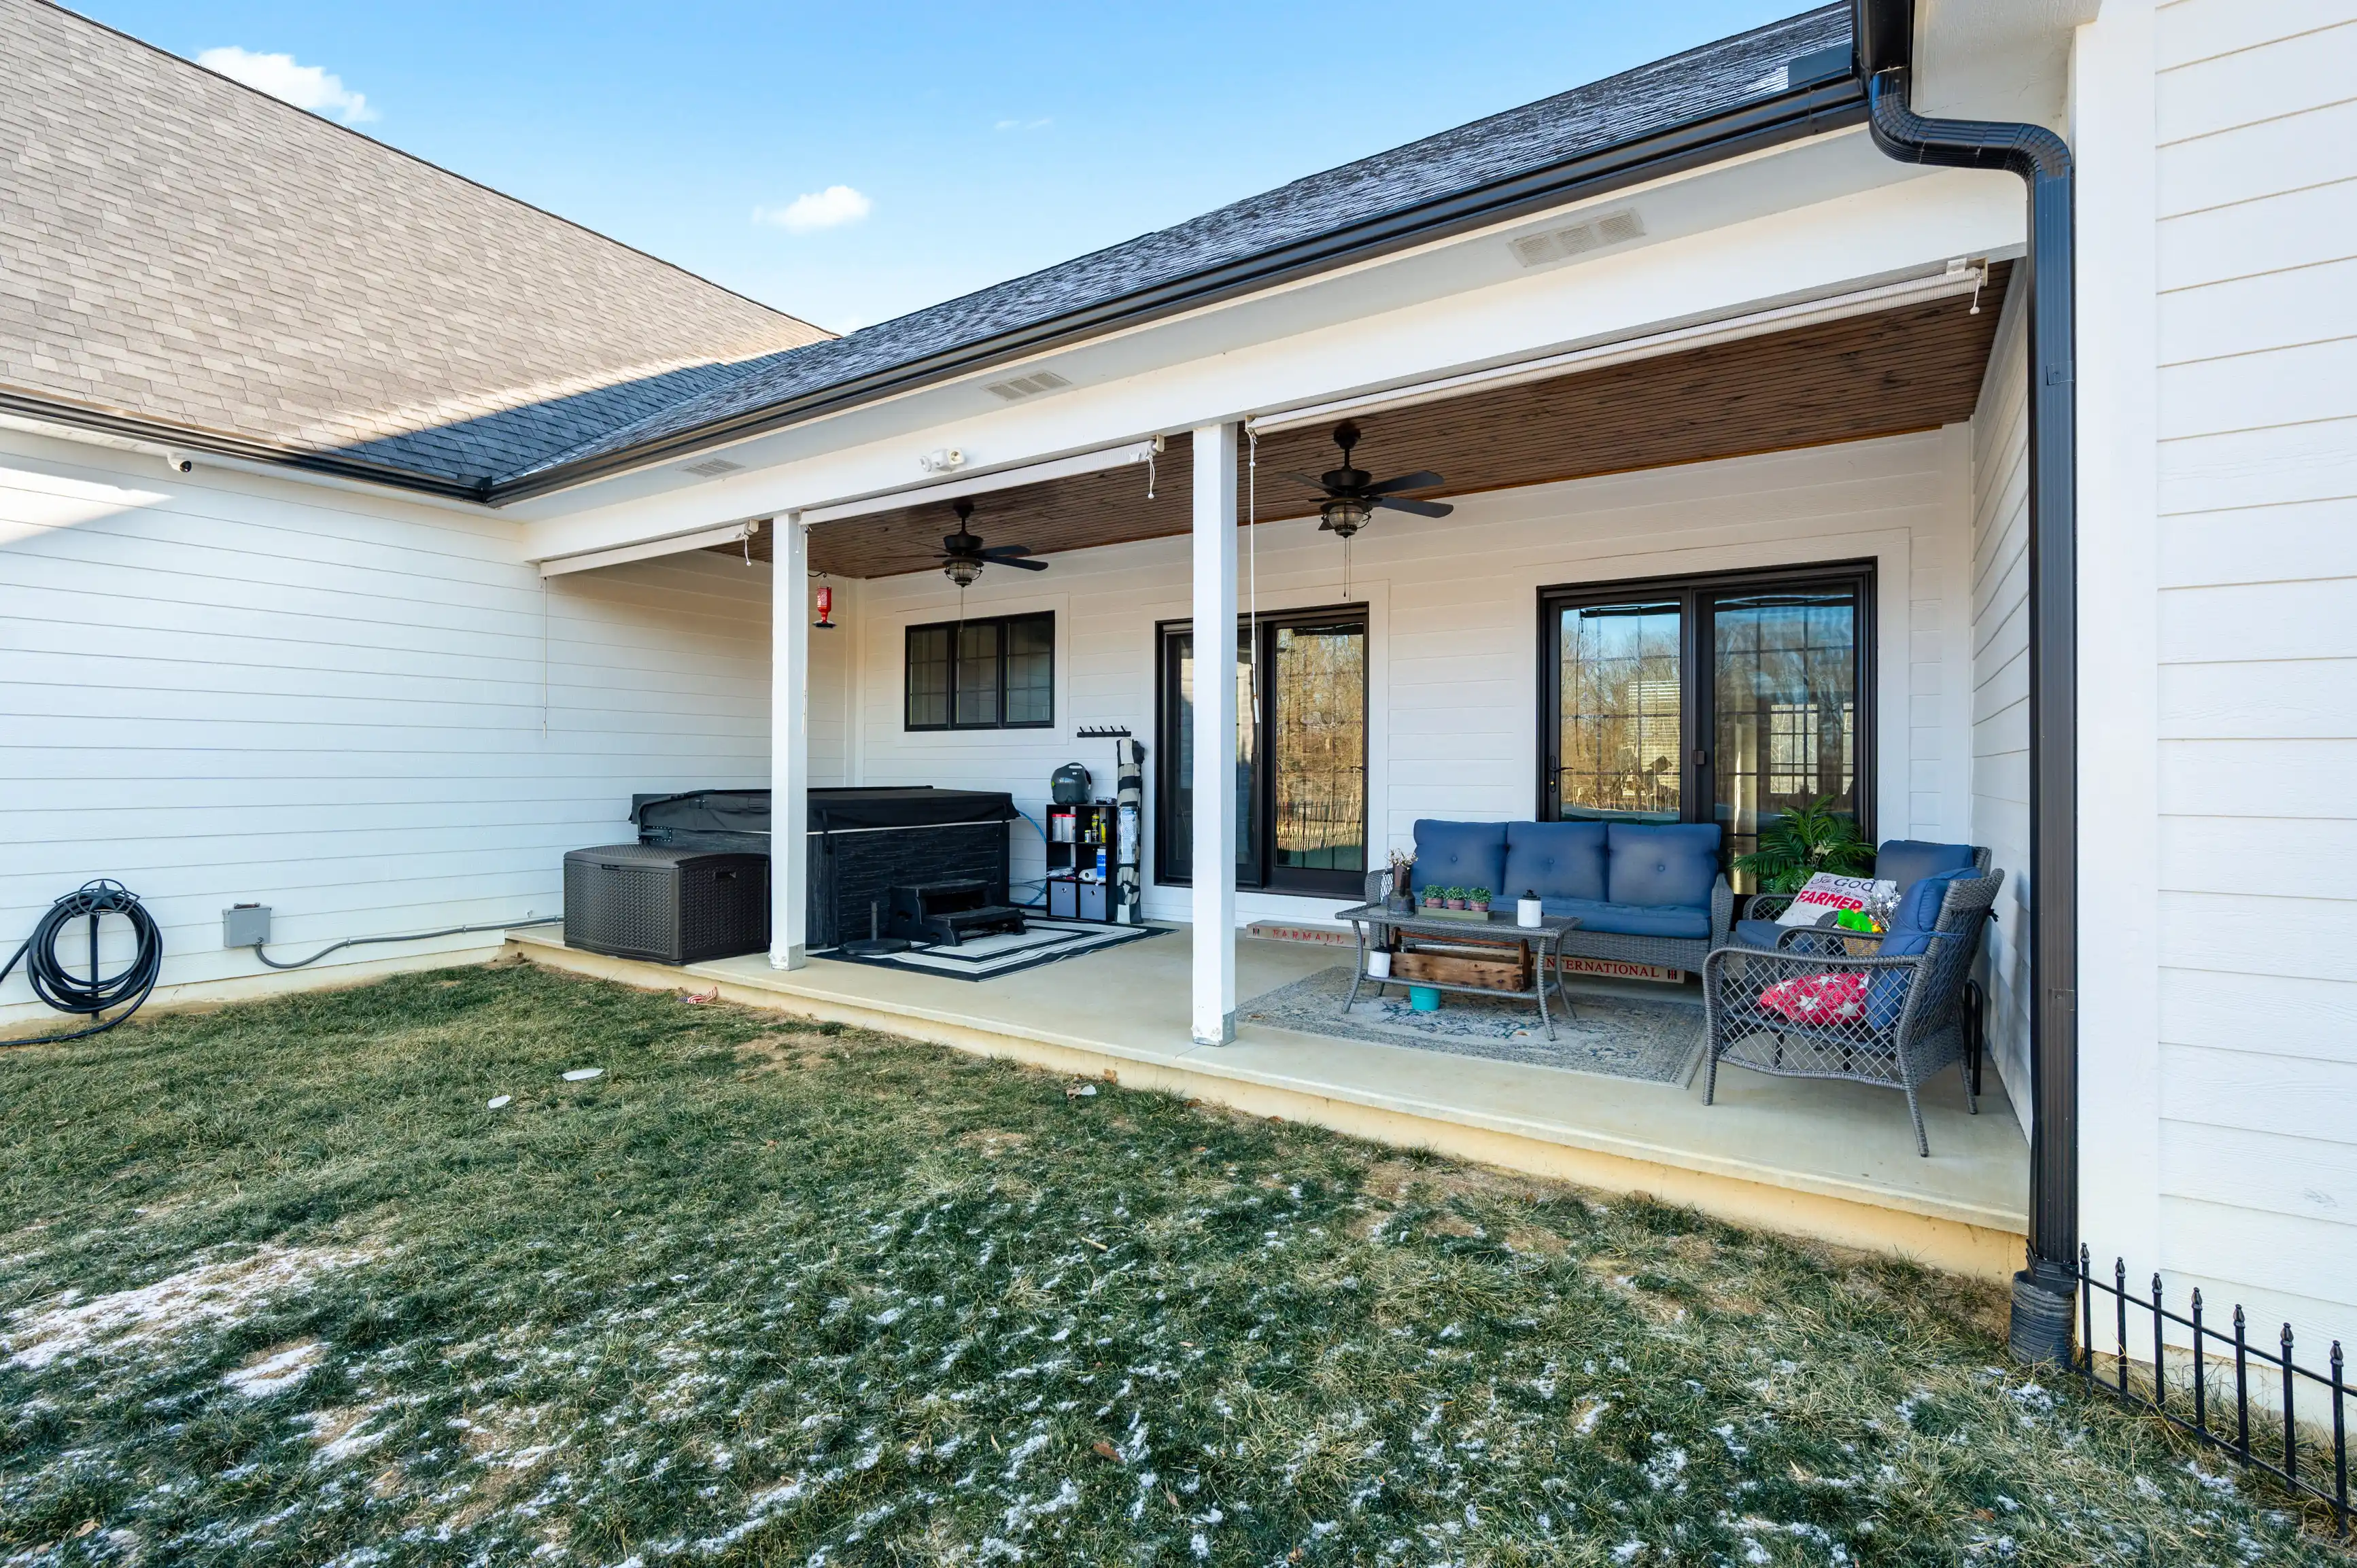 Backyard covered porch with seating area, grill, and ceiling fans attached to a house with a partially snow-covered lawn.